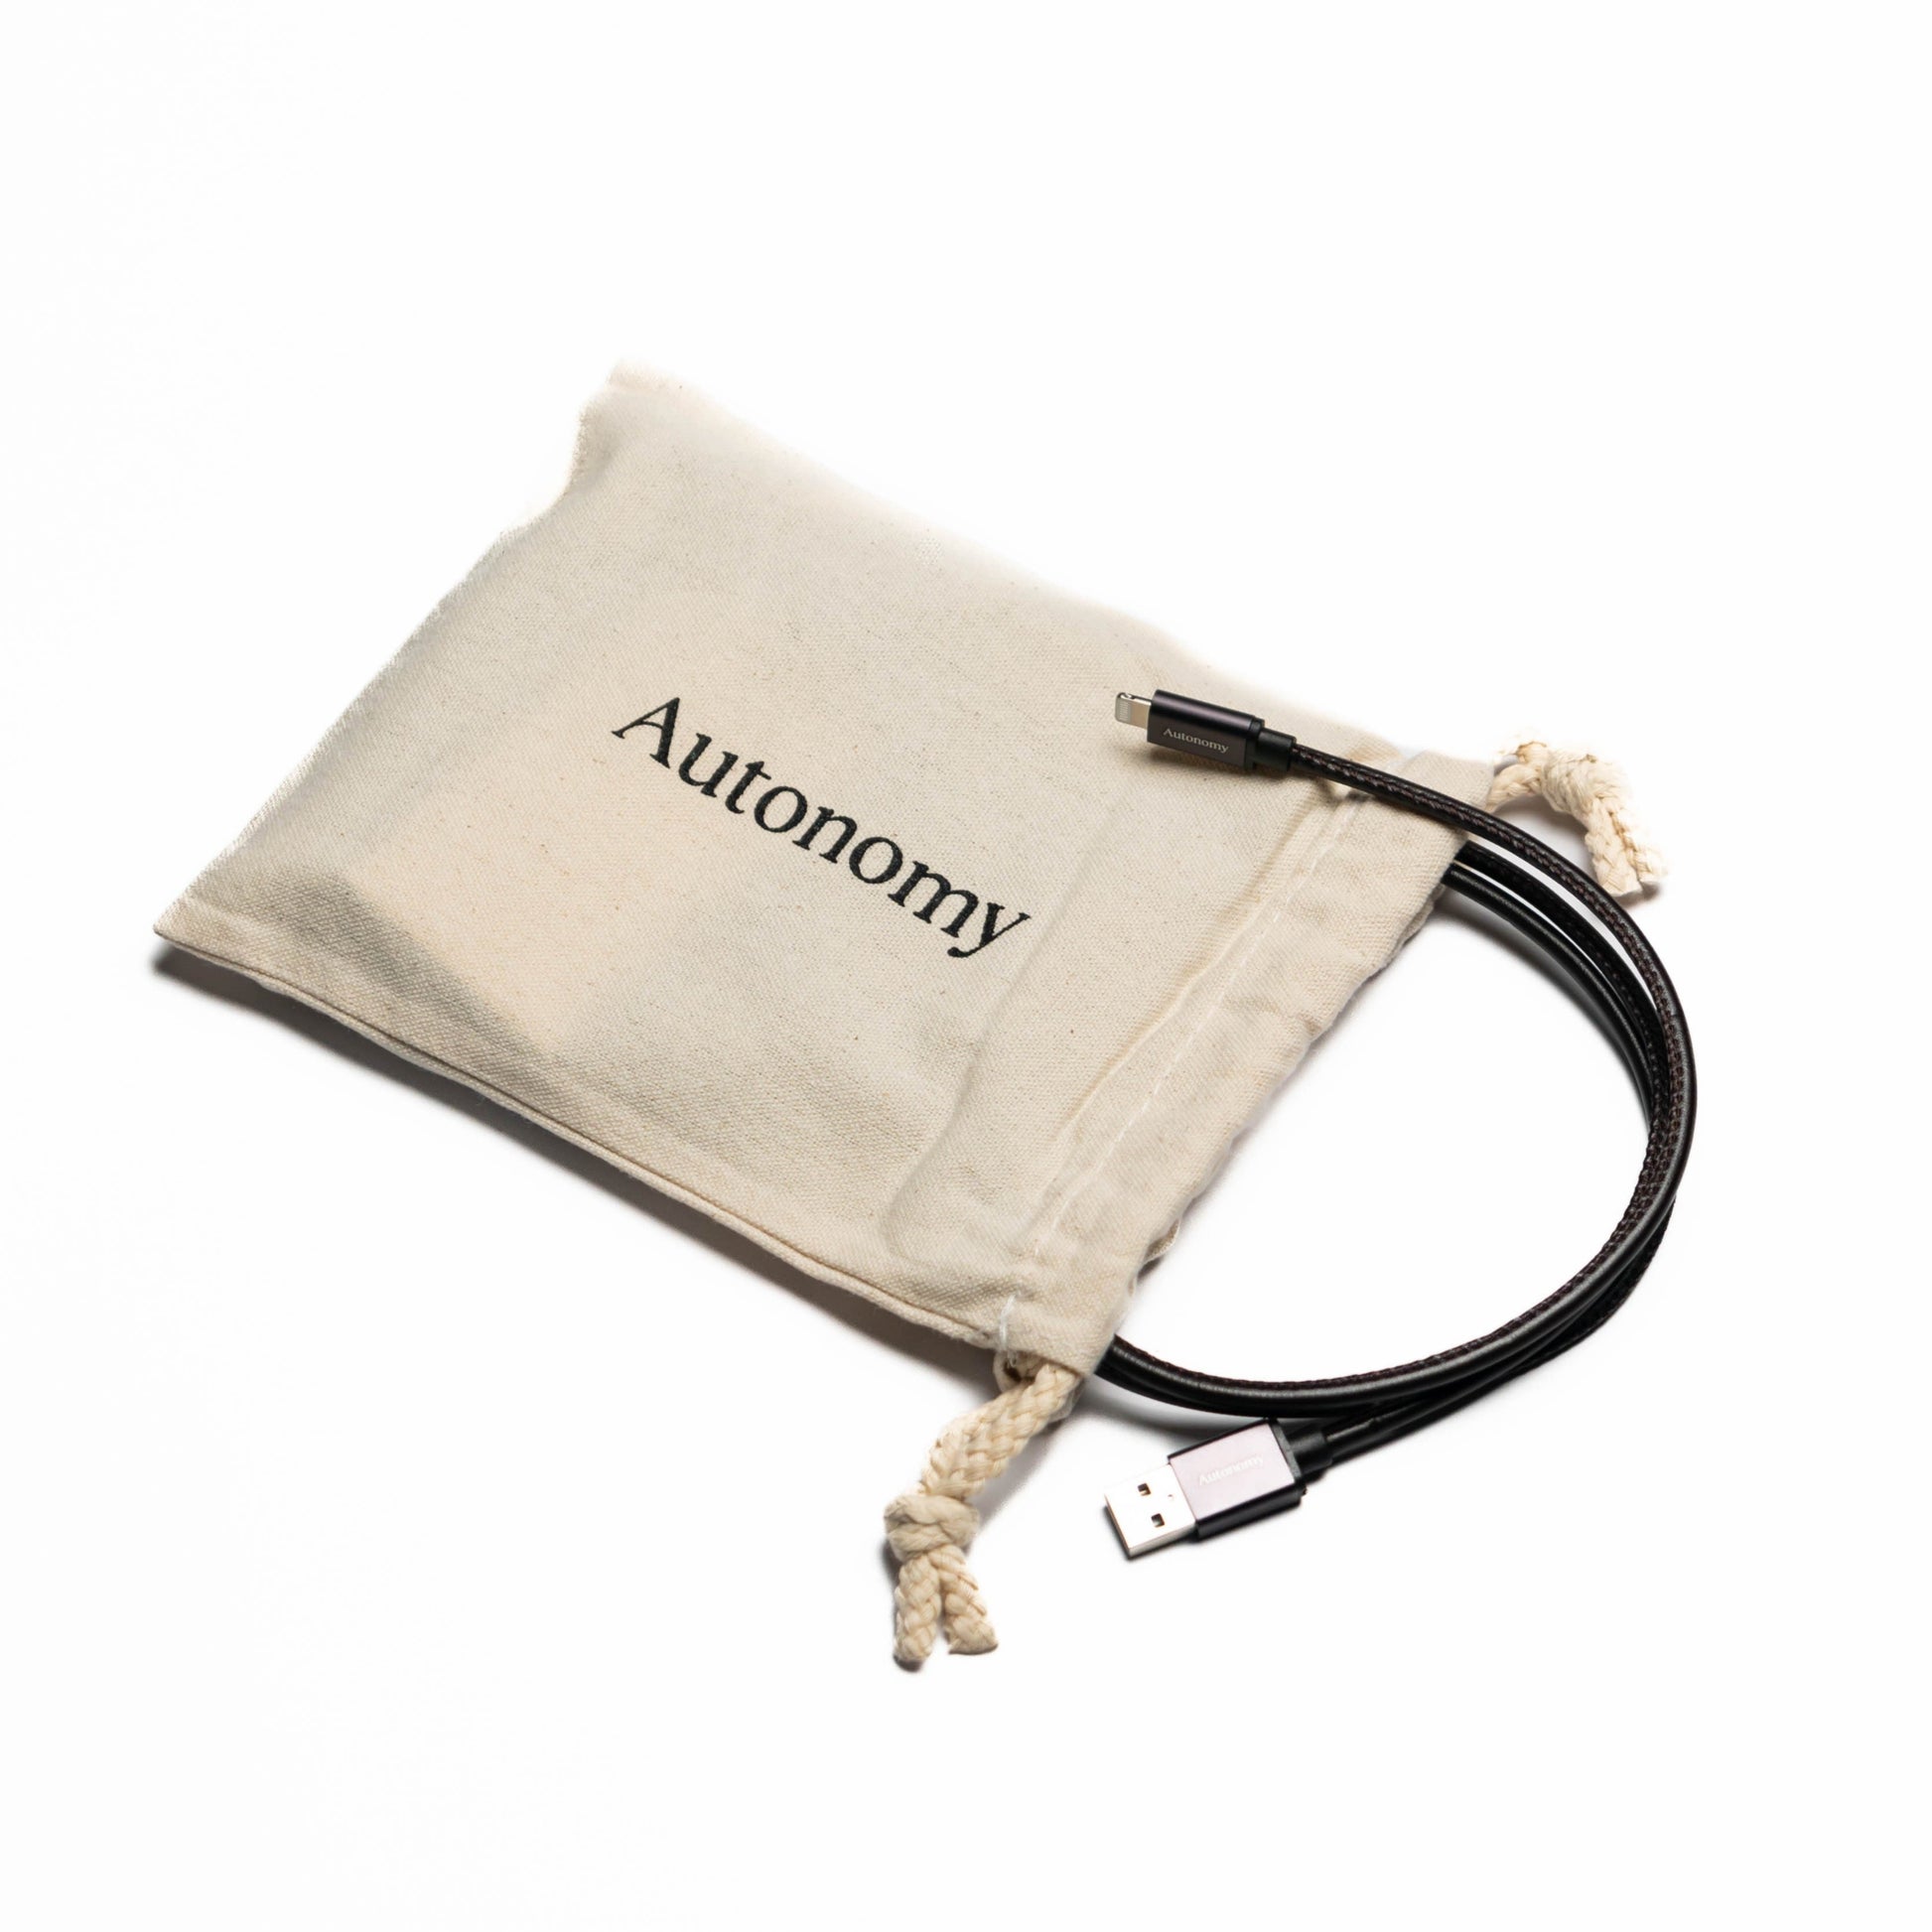 Black autonomy branded usb iphone charger cable with its satchel that it comes in on a white background